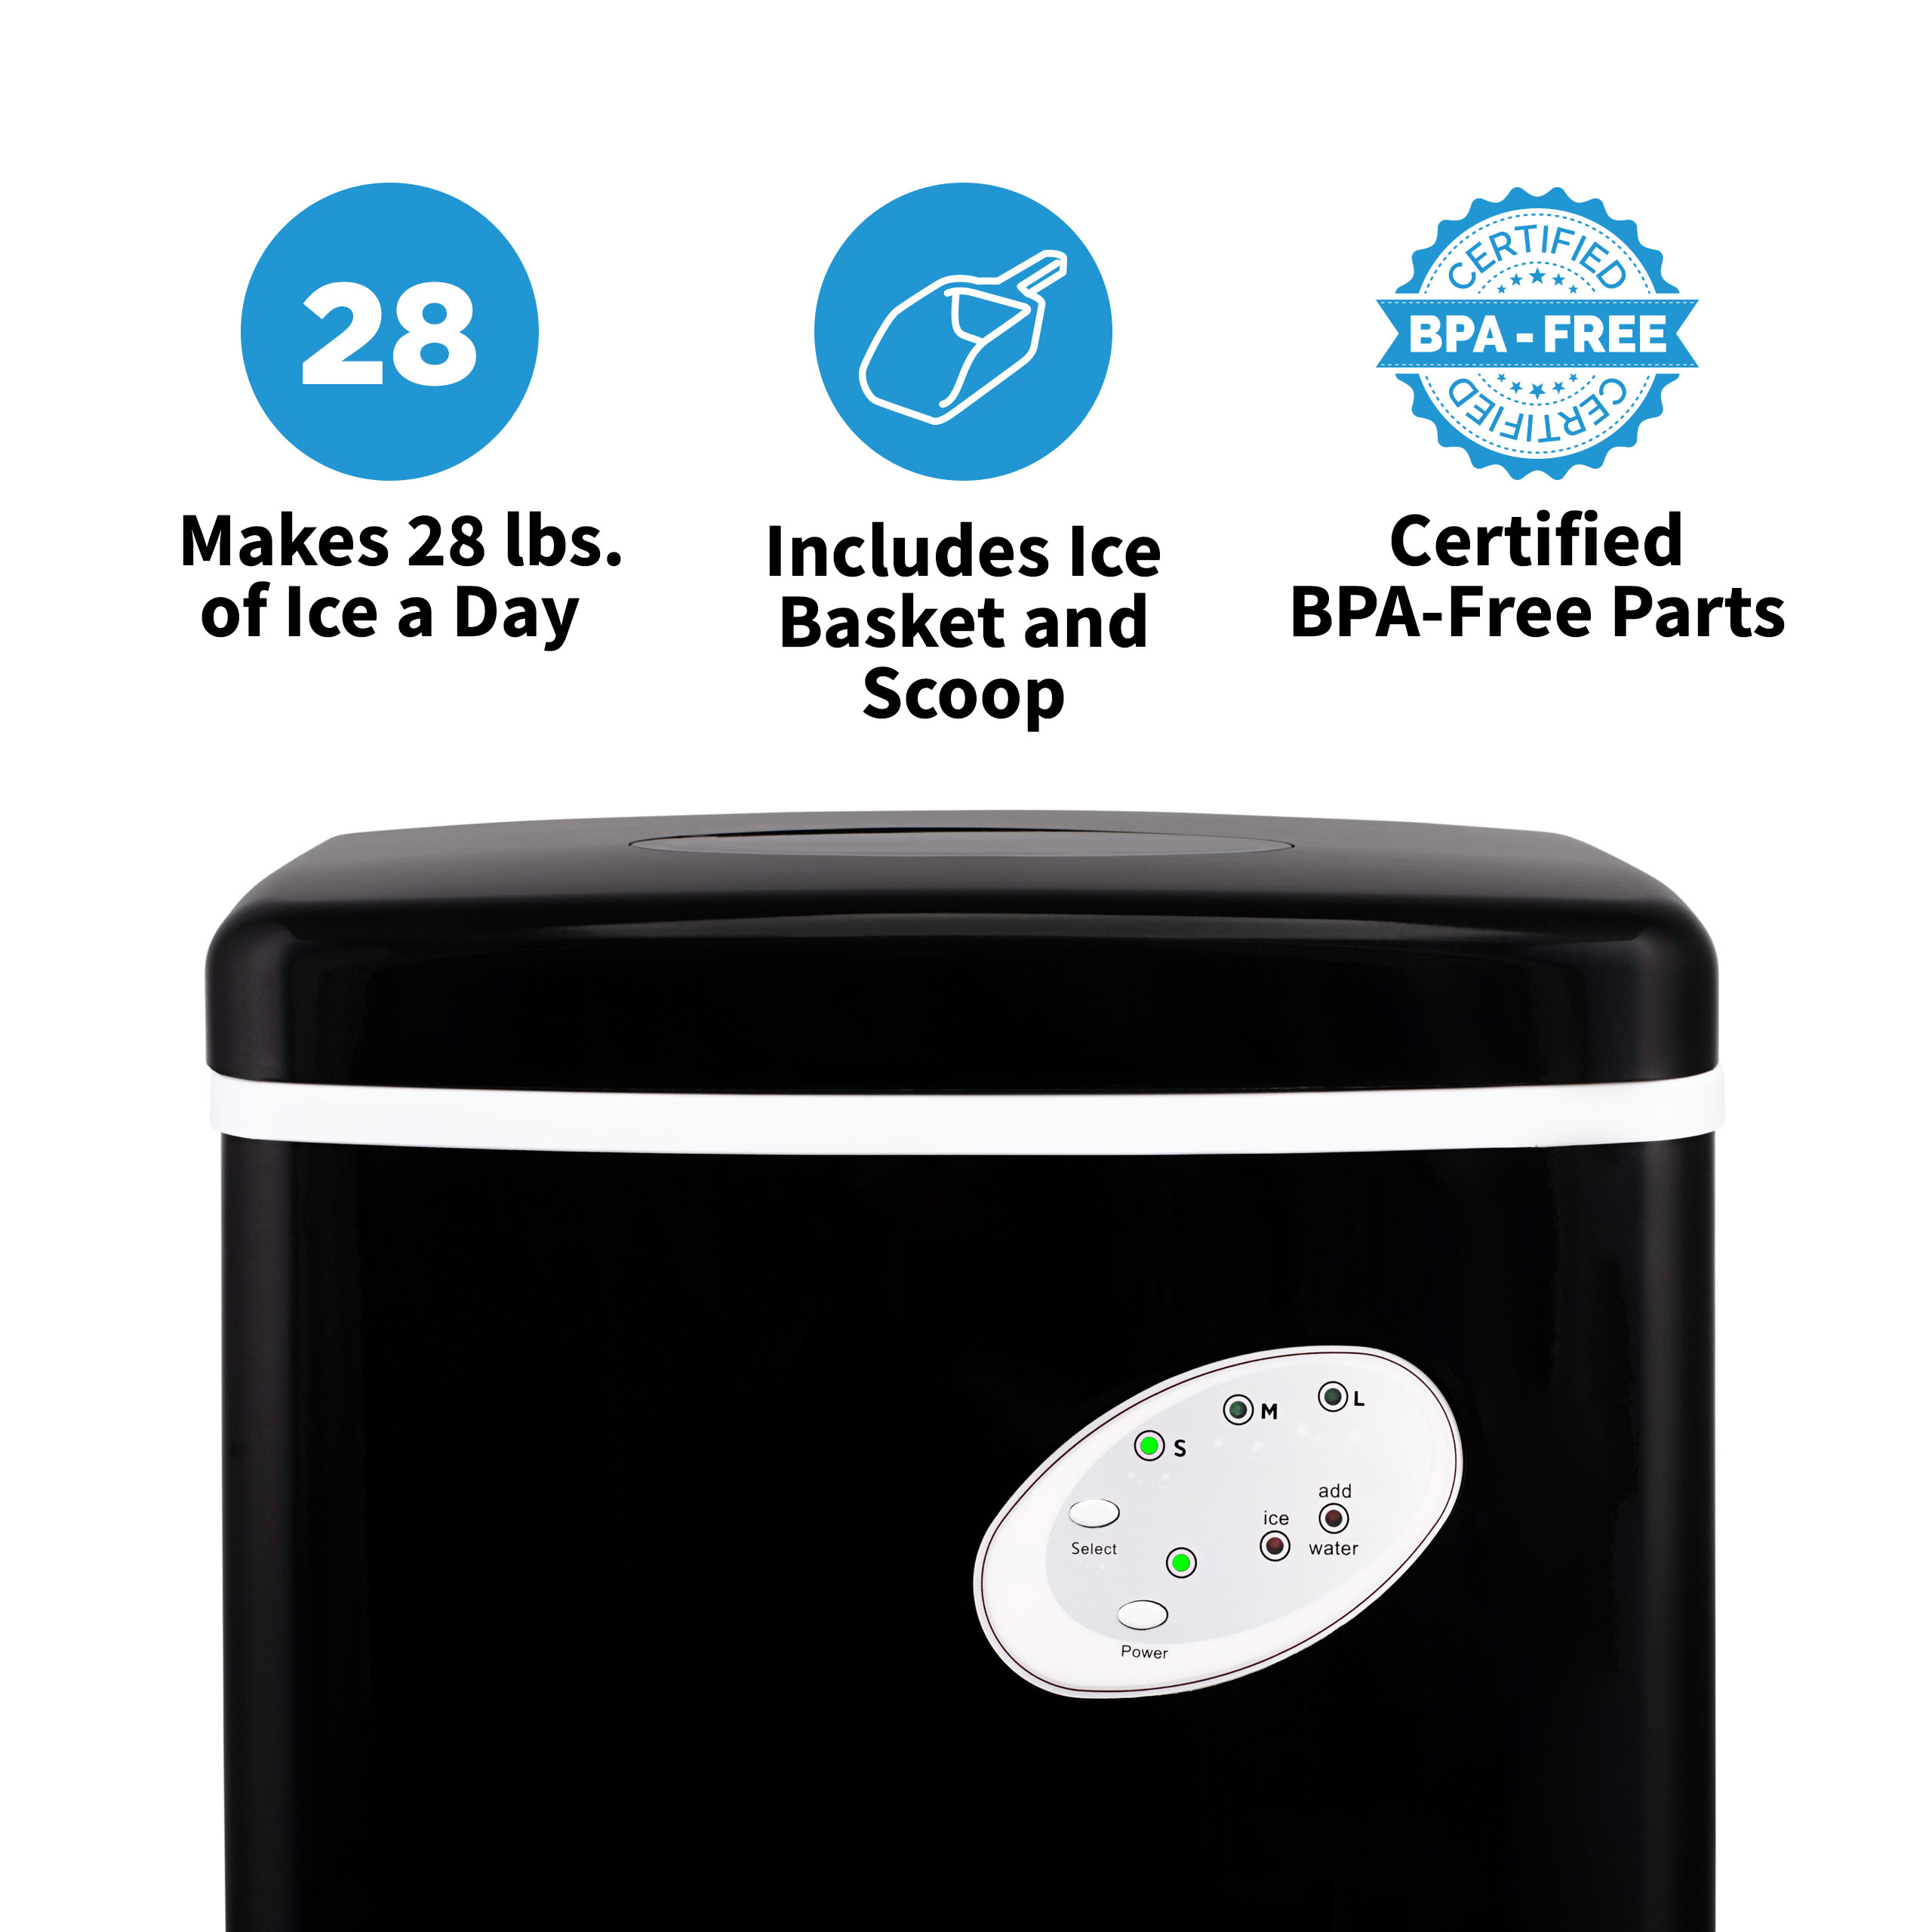 Newair Black Countertop Bullet Ice Maker | 28 lbs. a Day | 3 Ice Sizes - image 3 of 12